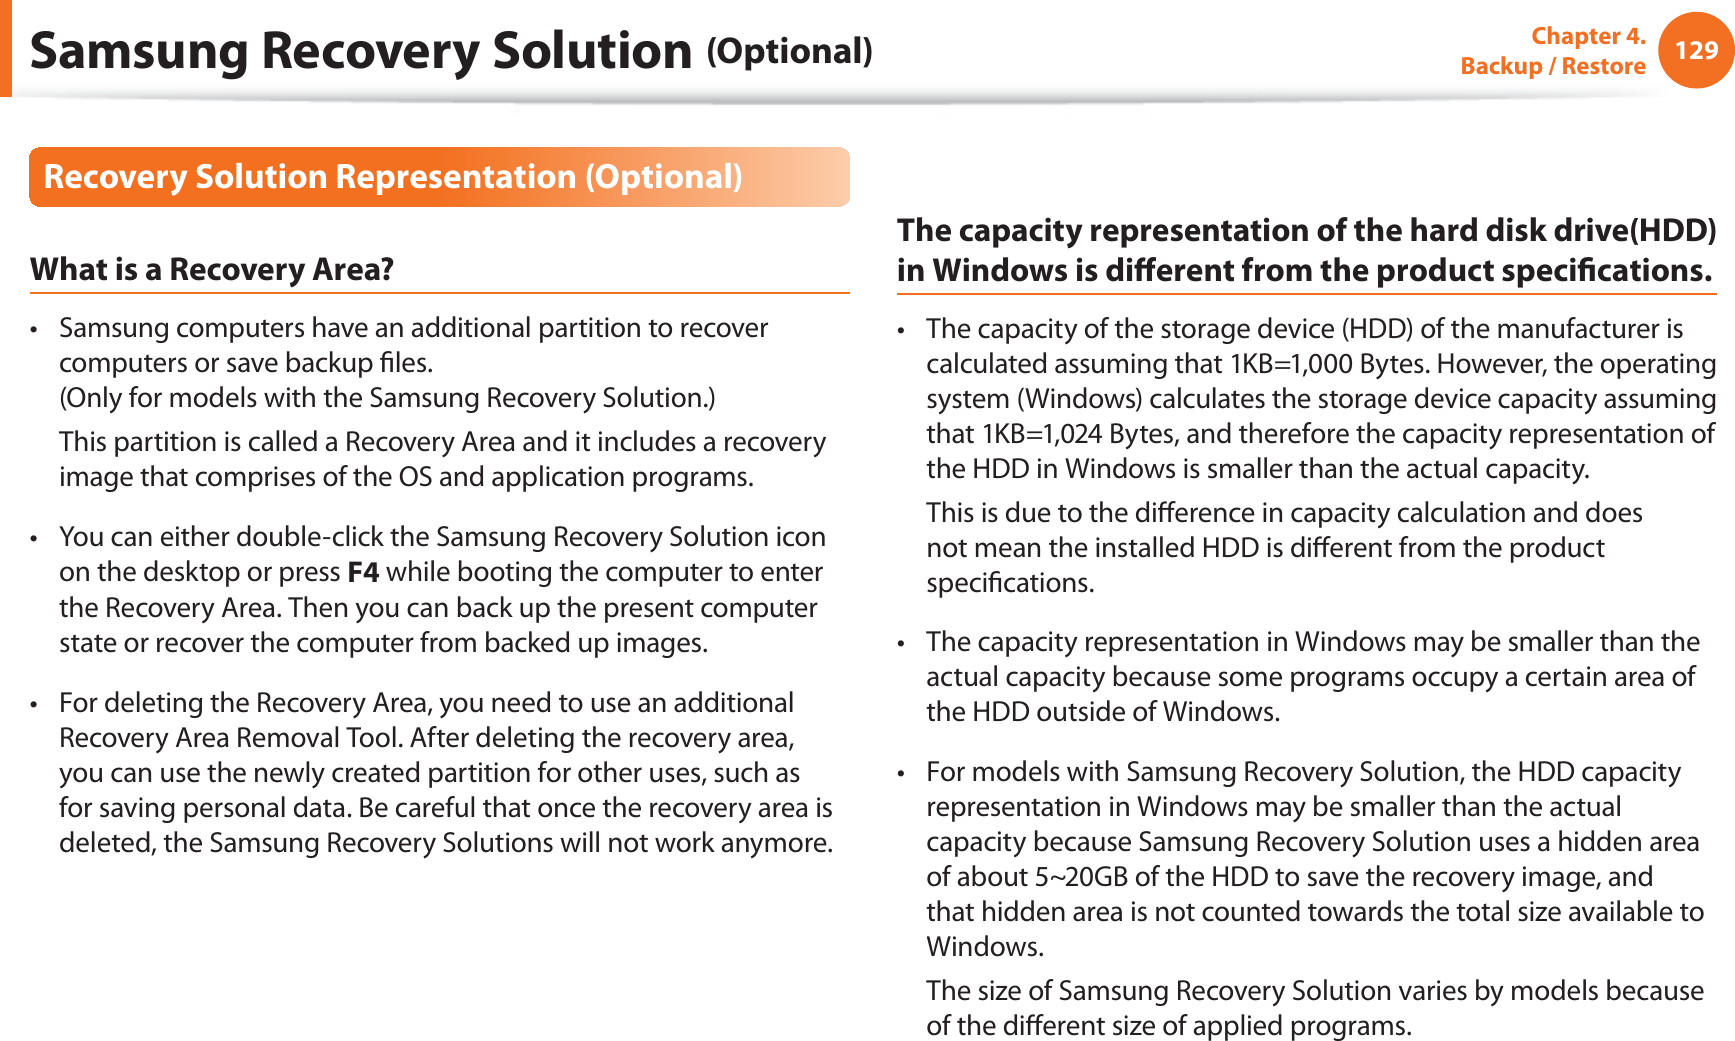 129Chapter 4.   Backup / RestoreRecovery Solution Representation (Optional)What is a Recovery Area?Samsung computers have an additional partition to recover t computers or save backup ﬁles. (Only for models with the Samsung Recovery Solution.)  This partition is called a Recovery Area and it includes a recovery image that comprises of the OS and application programs.You can either double-click the Samsung Recovery Solution icon t on the desktop or press F4 while booting the computer to enter the Recovery Area. Then you can back up the present computer state or recover the computer from backed up images.For deleting the Recovery Area, you need to use an additional t Recovery Area Removal Tool. After deleting the recovery area, you can use the newly created partition for other uses, such as for saving personal data. Be careful that once the recovery area is deleted, the Samsung Recovery Solutions will not work anymore.The capacity representation of the hard disk drive(HDD) in Windows is diﬀerent from the product speciﬁcations.The capacity of the storage device (HDD) of the manufacturer is t calculated assuming that 1KB=1,000 Bytes. However, the operating system (Windows) calculates the storage device capacity assuming that 1KB=1,024 Bytes, and therefore the capacity representation of the HDD in Windows is smaller than the actual capacity.  This is due to the diﬀerence in capacity calculation and does not mean the installed HDD is diﬀerent from the product speciﬁcations.The capacity representation in Windows may be smaller than the t actual capacity because some programs occupy a certain area of the HDD outside of Windows.For models with Samsung Recovery Solution, the HDD capacity t representation in Windows may be smaller than the actual capacity because Samsung Recovery Solution uses a hidden area of about 5~20GB of the HDD to save the recovery image, and that hidden area is not counted towards the total size available to Windows.  The size of Samsung Recovery Solution varies by models because of the diﬀerent size of applied programs.Samsung Recovery Solution (Optional)